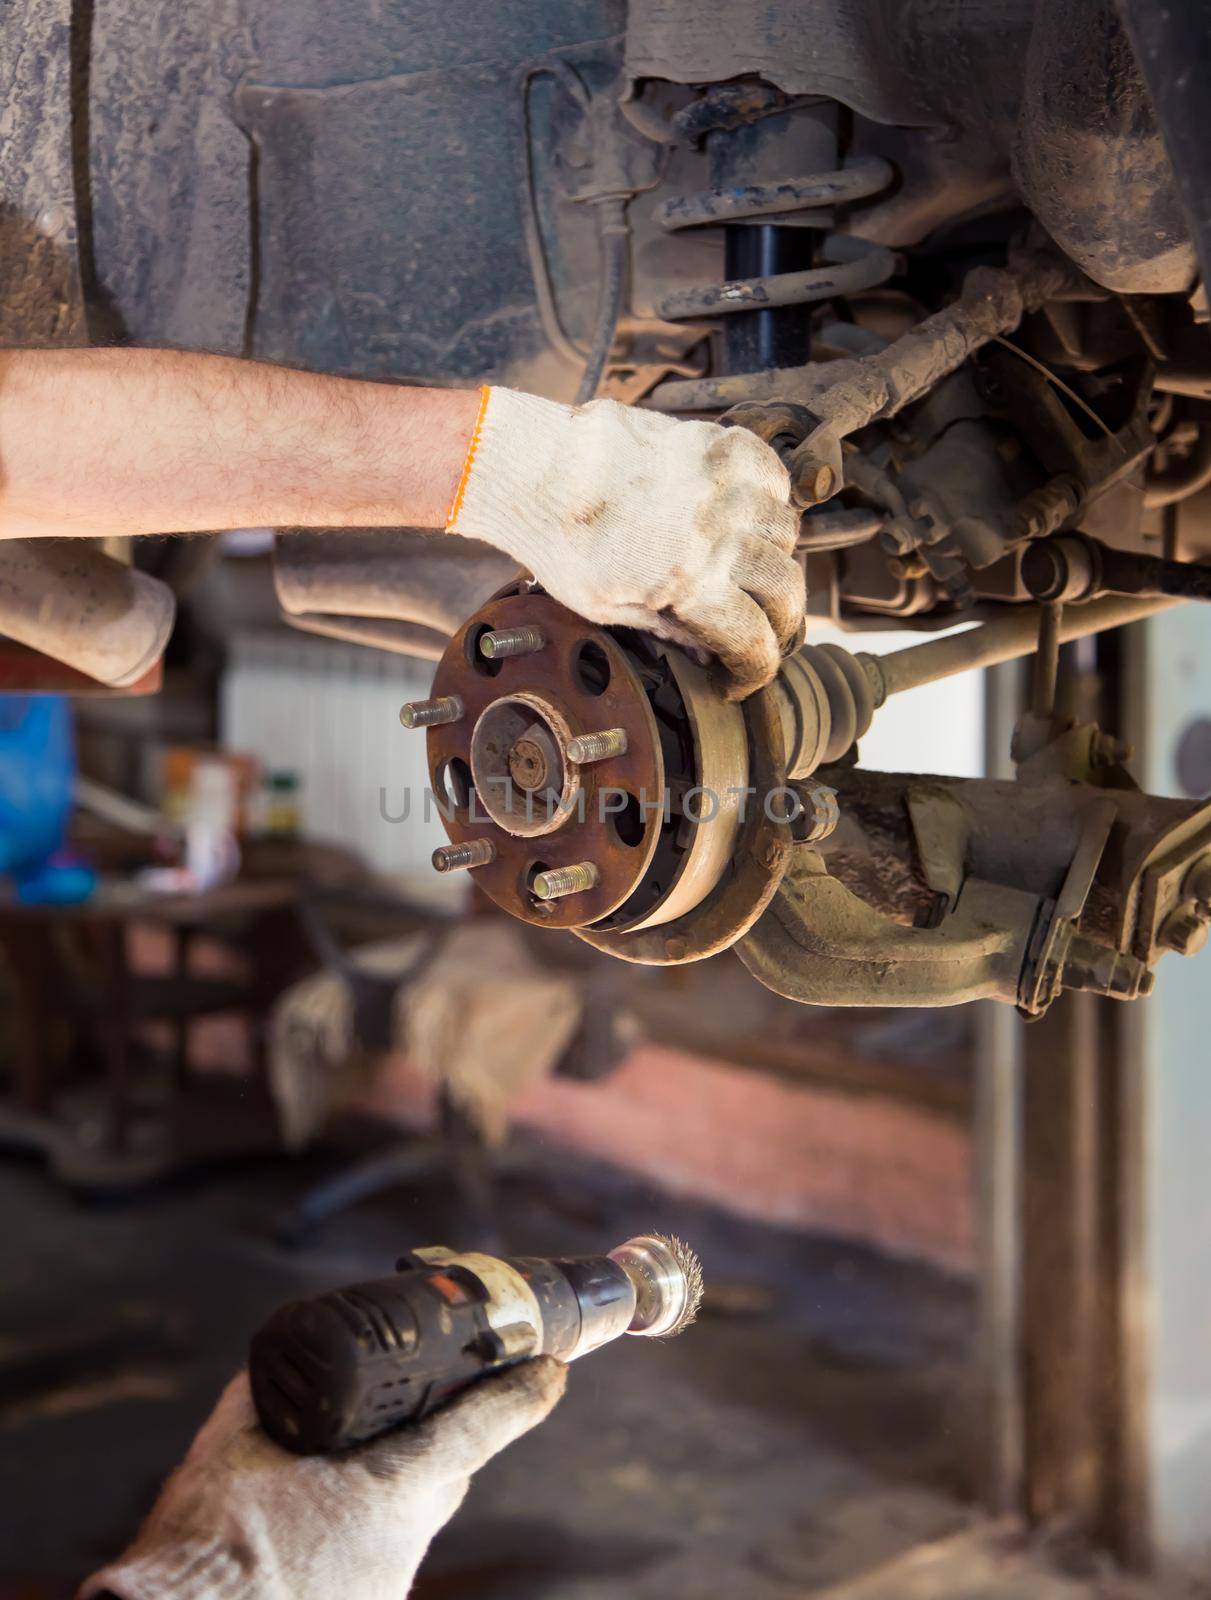 Use a power tool to remove rust from the worn rear wheel hub. In the garage, a person changes the failed parts on the vehicle. Small business concept, car repair and maintenance service.